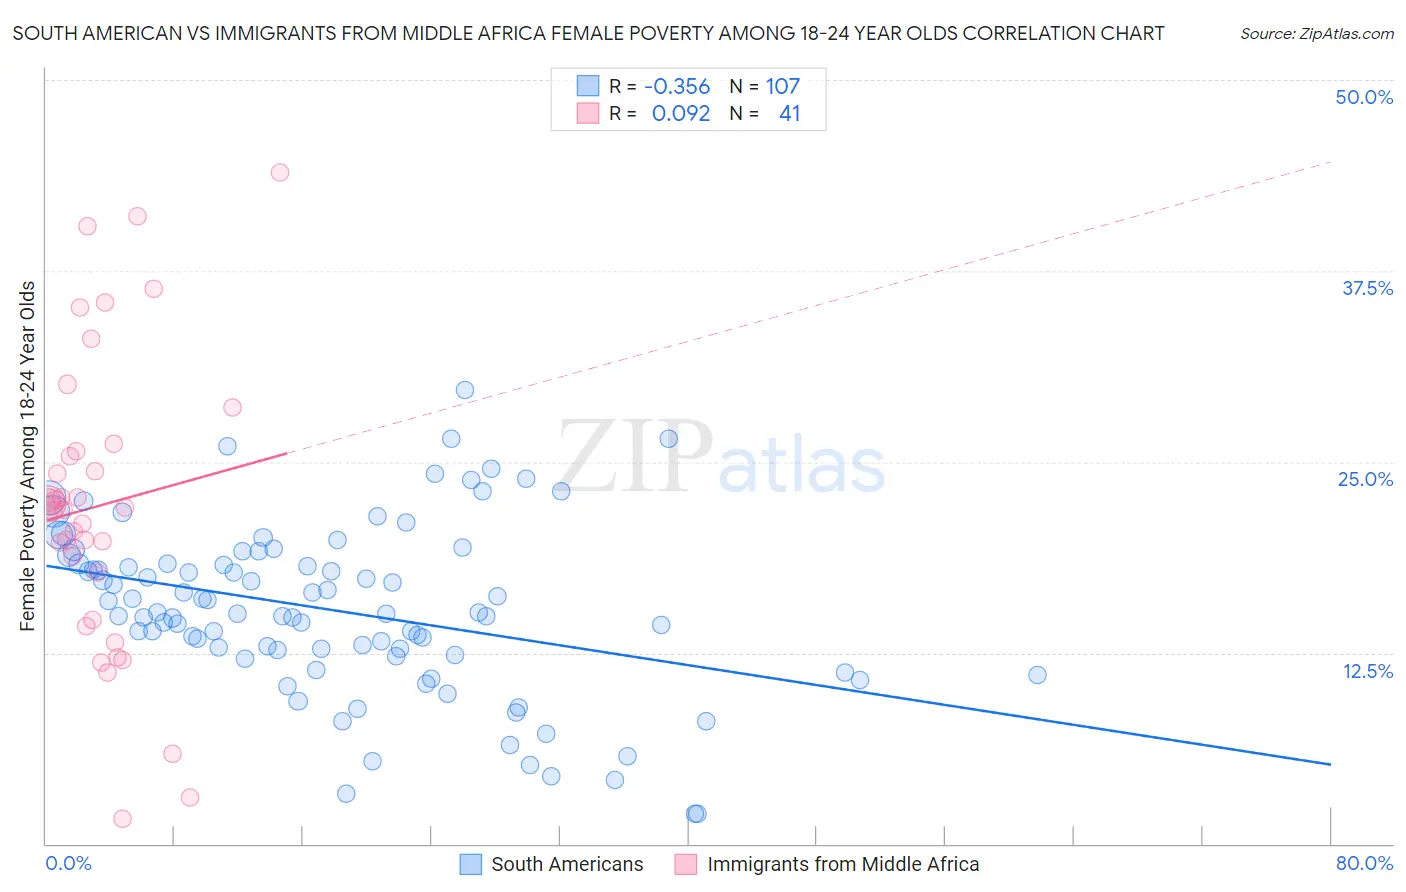 South American vs Immigrants from Middle Africa Female Poverty Among 18-24 Year Olds